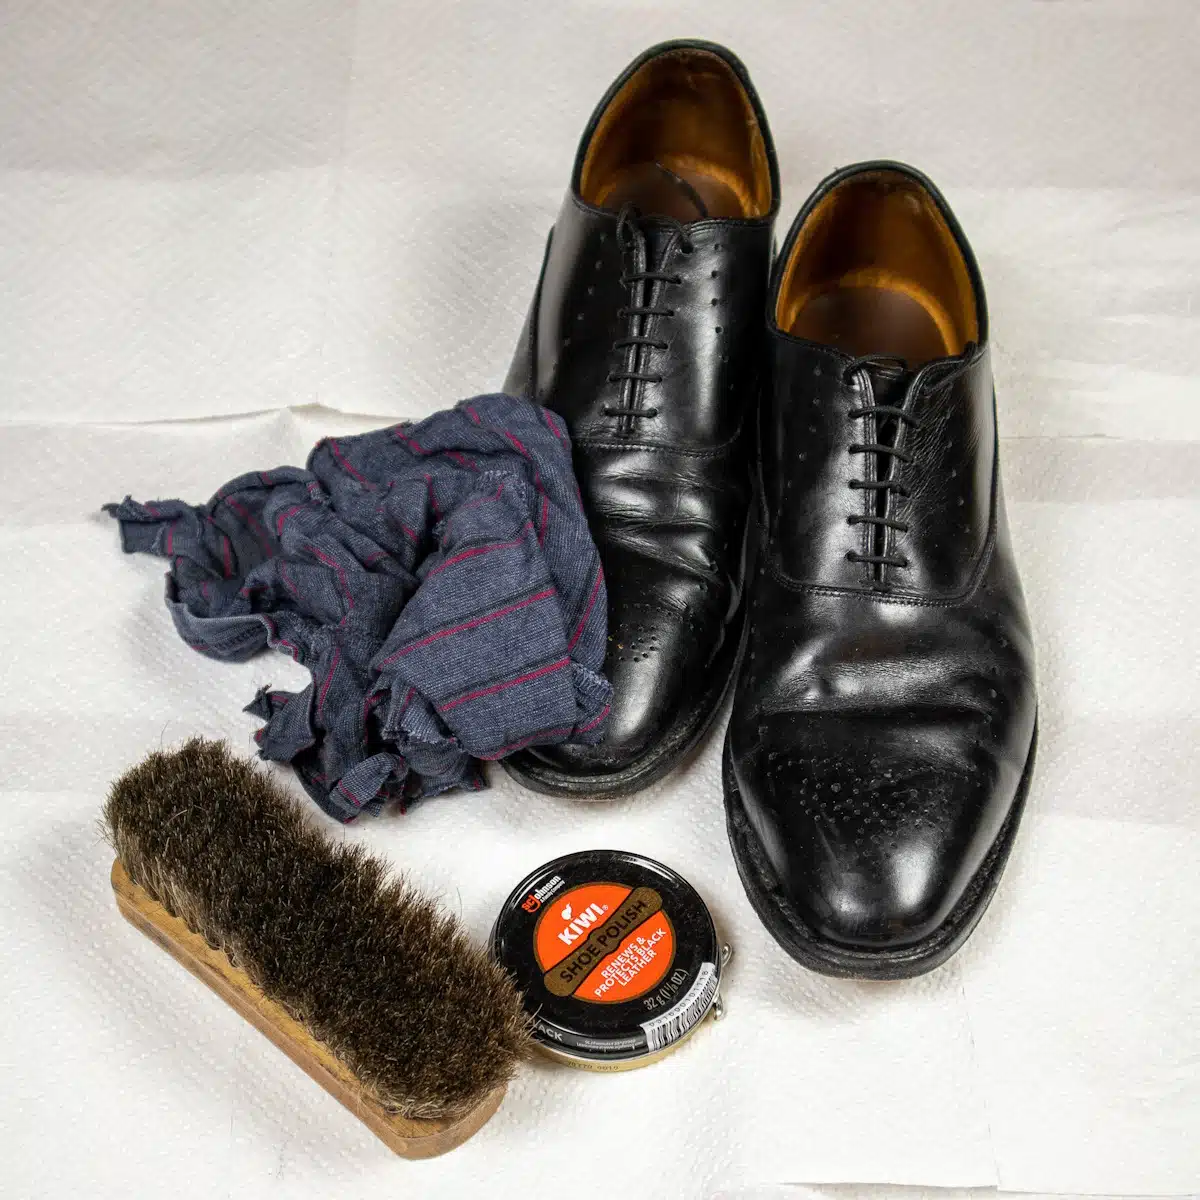 4 Best Shoe Polishes for Shining Up Your Leather - How to Use